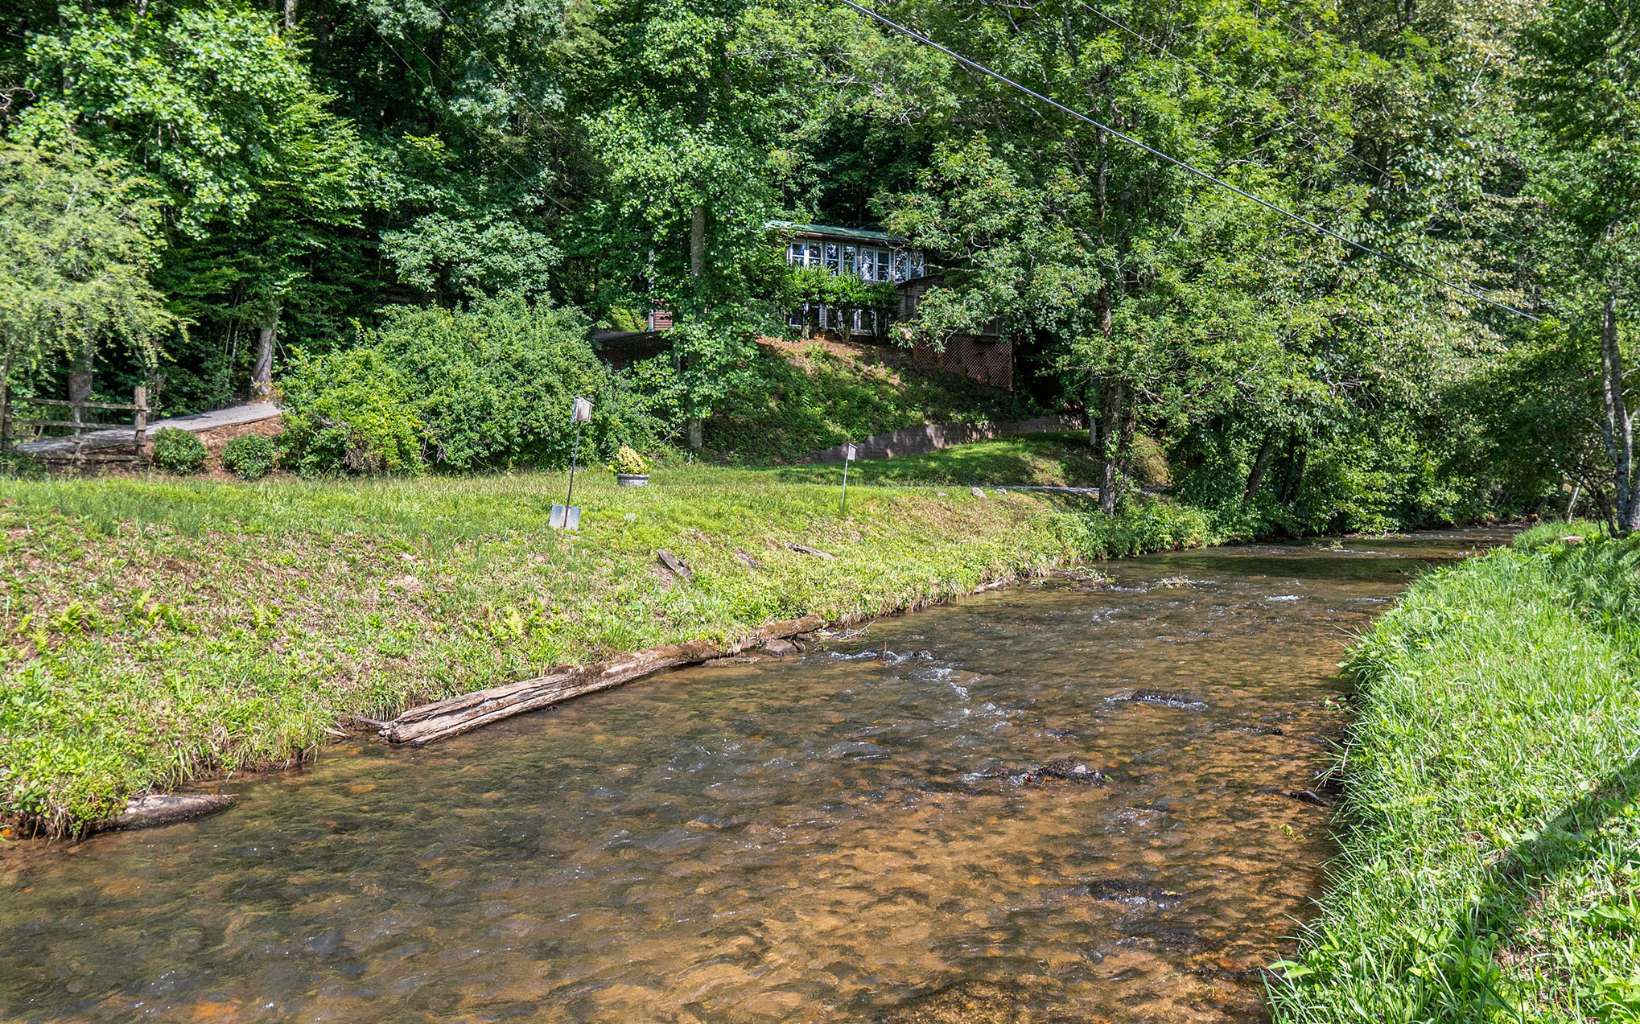 Appropriately named Hidden Valley-This cozy cabin, lovingly called "Rabbit Hill", is nestled in the valley, perched perfectly above Little Mountaintown Creek. Enjoy the sounds and life of living on the Water. Yes-CREEK FRONTAGE! You own to the center of it! GO FISHING anytime or Sit Back-Relax-Take a nap listening from the breezy Screened In Porch. THIS HOME HAS CHARACTER GALORE with many unique features- starting with a little cabin style well house with extra storage for your toys-a rustic 2 stall parking shed- a green house addition-an upstairs deck off the sunroom overlooking the green fields, meandering fences,the Creek & Seasonal Mountain View-a wood burning fireplace for chilly mountain nights and mature hardwoods providing shade in the summer time. It is like living in a bird's nest tucked away with an eagle's eye view of the valley. Come Experience The Good Life!